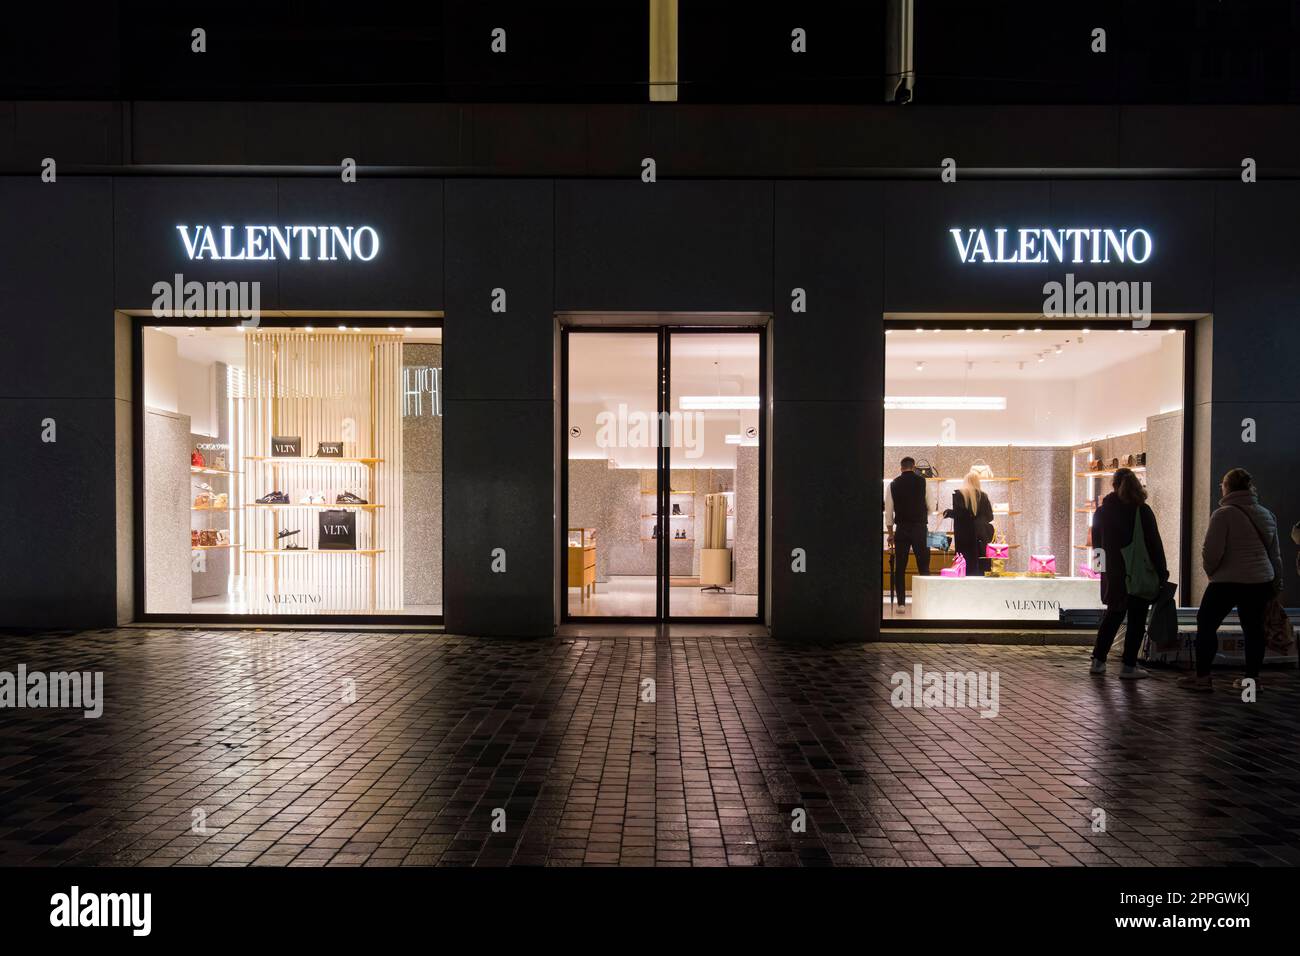 Fjerde at donere At Copenhagen, Denmark. October 2022. External view of the Valentino brand  store by night in the city center Stock Photo - Alamy